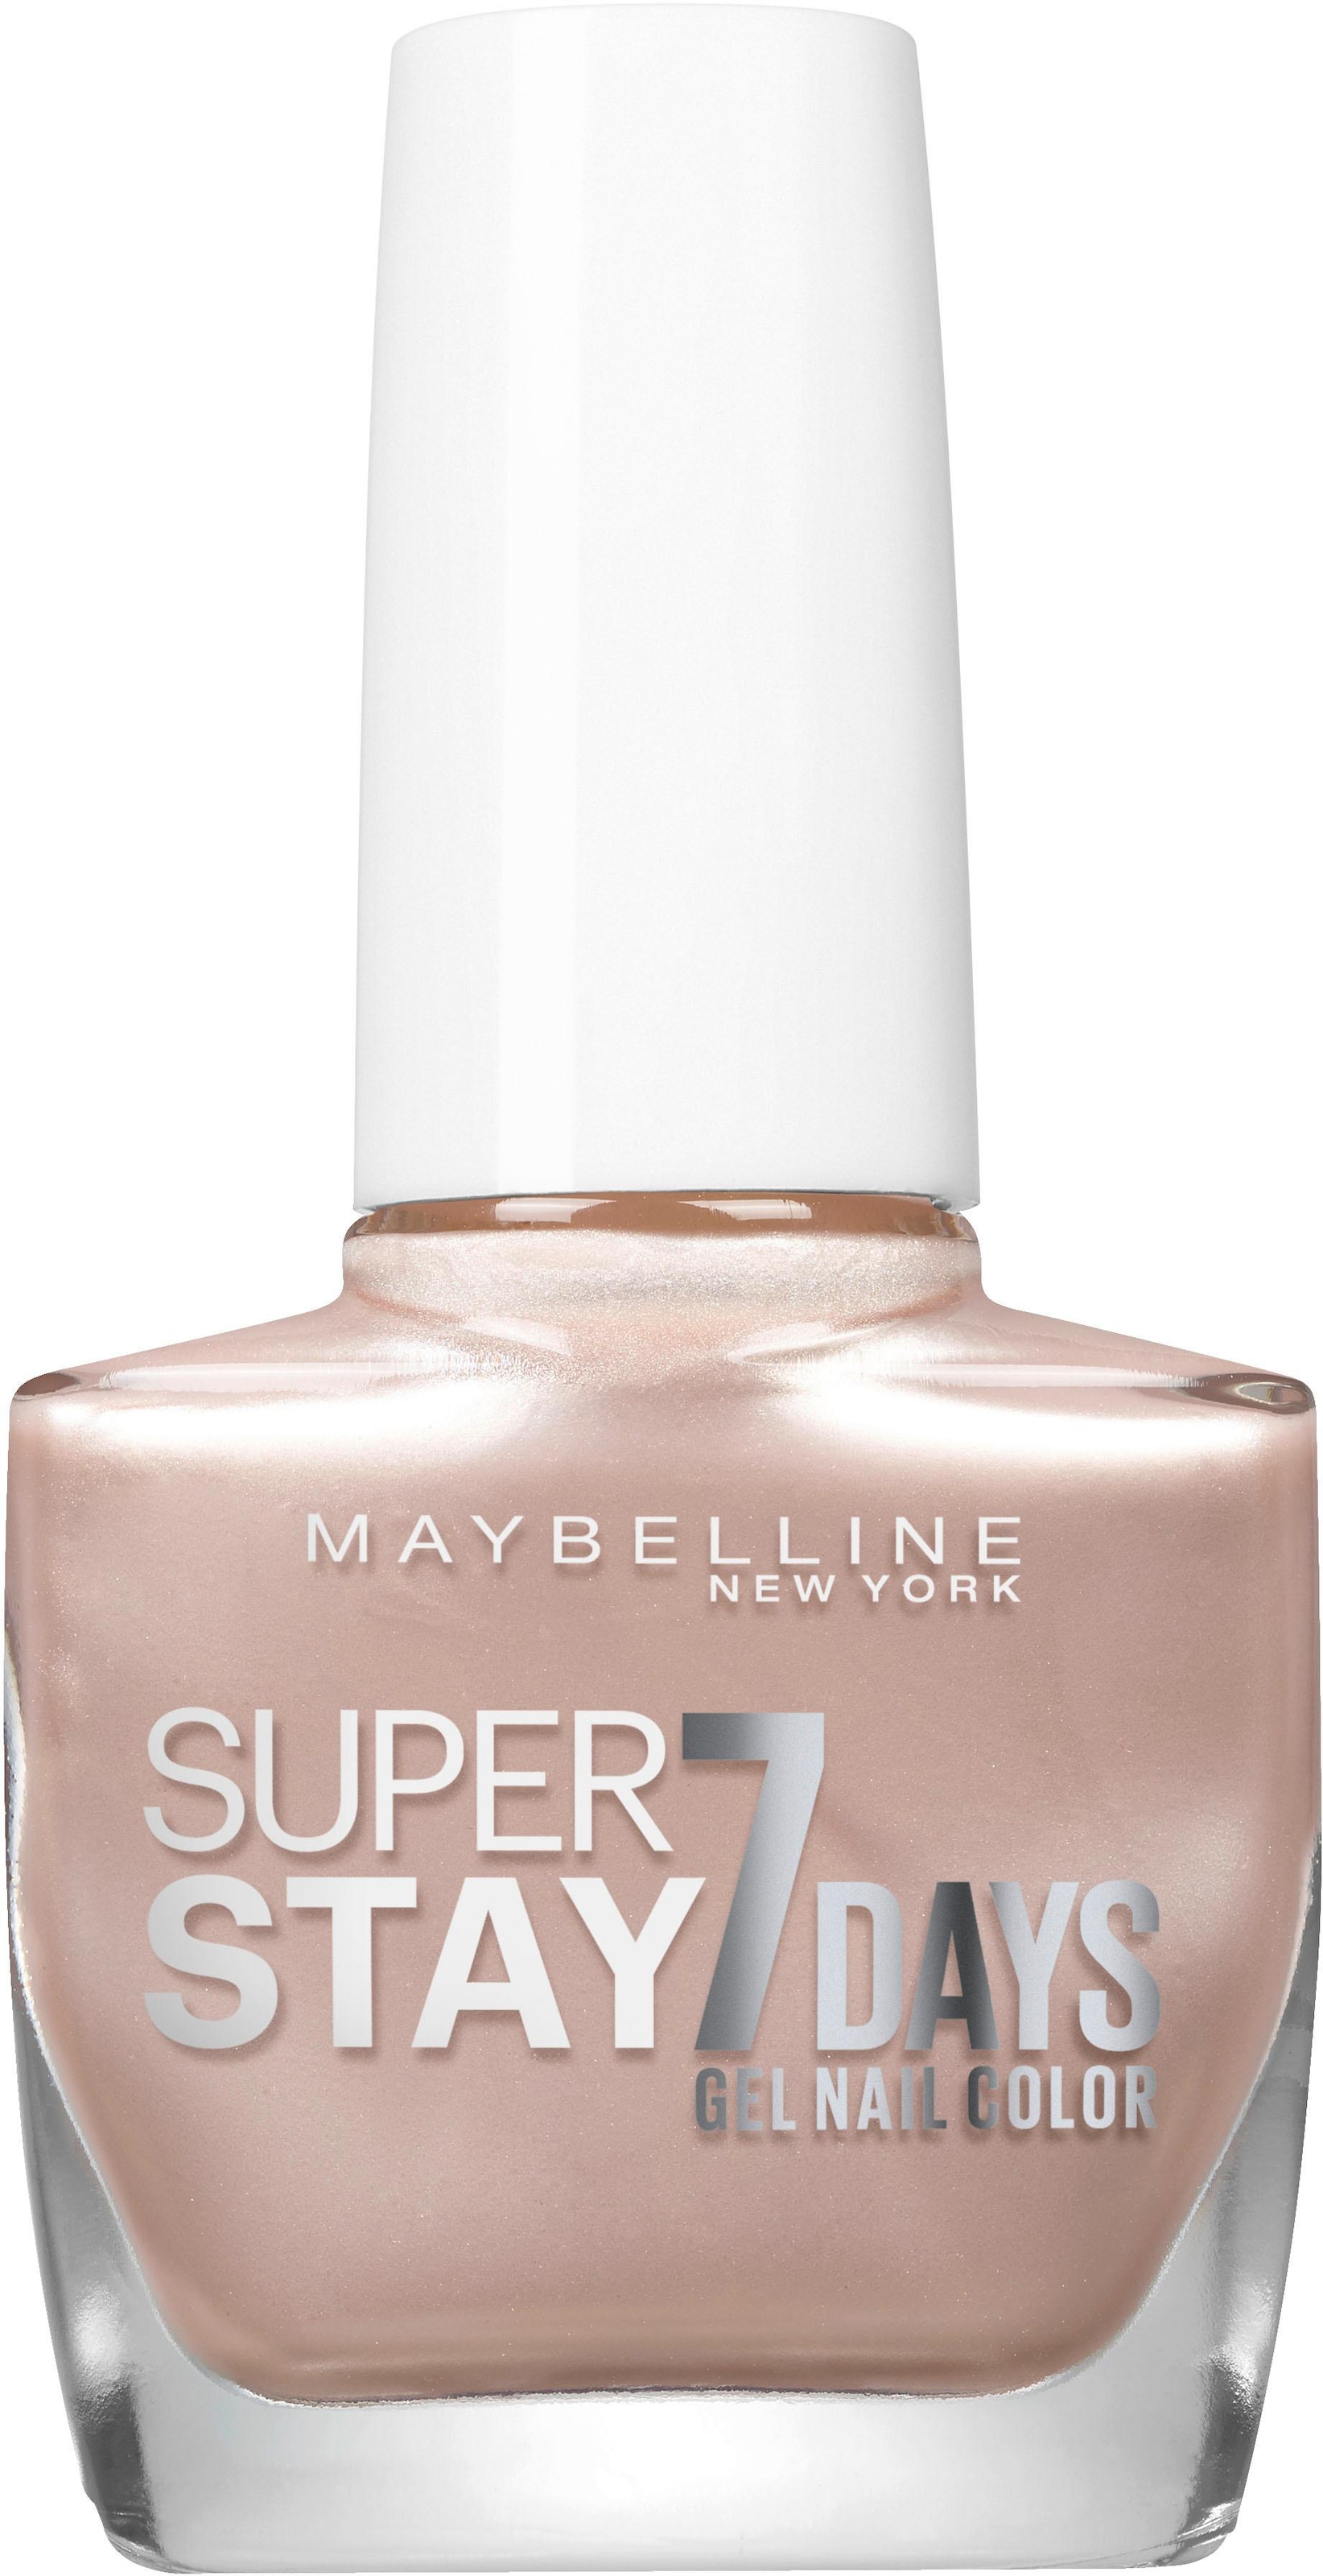 MAYBELLINE NEW YORK Nagellack »Superstay bei ♕ Nudes« Tage 7 City